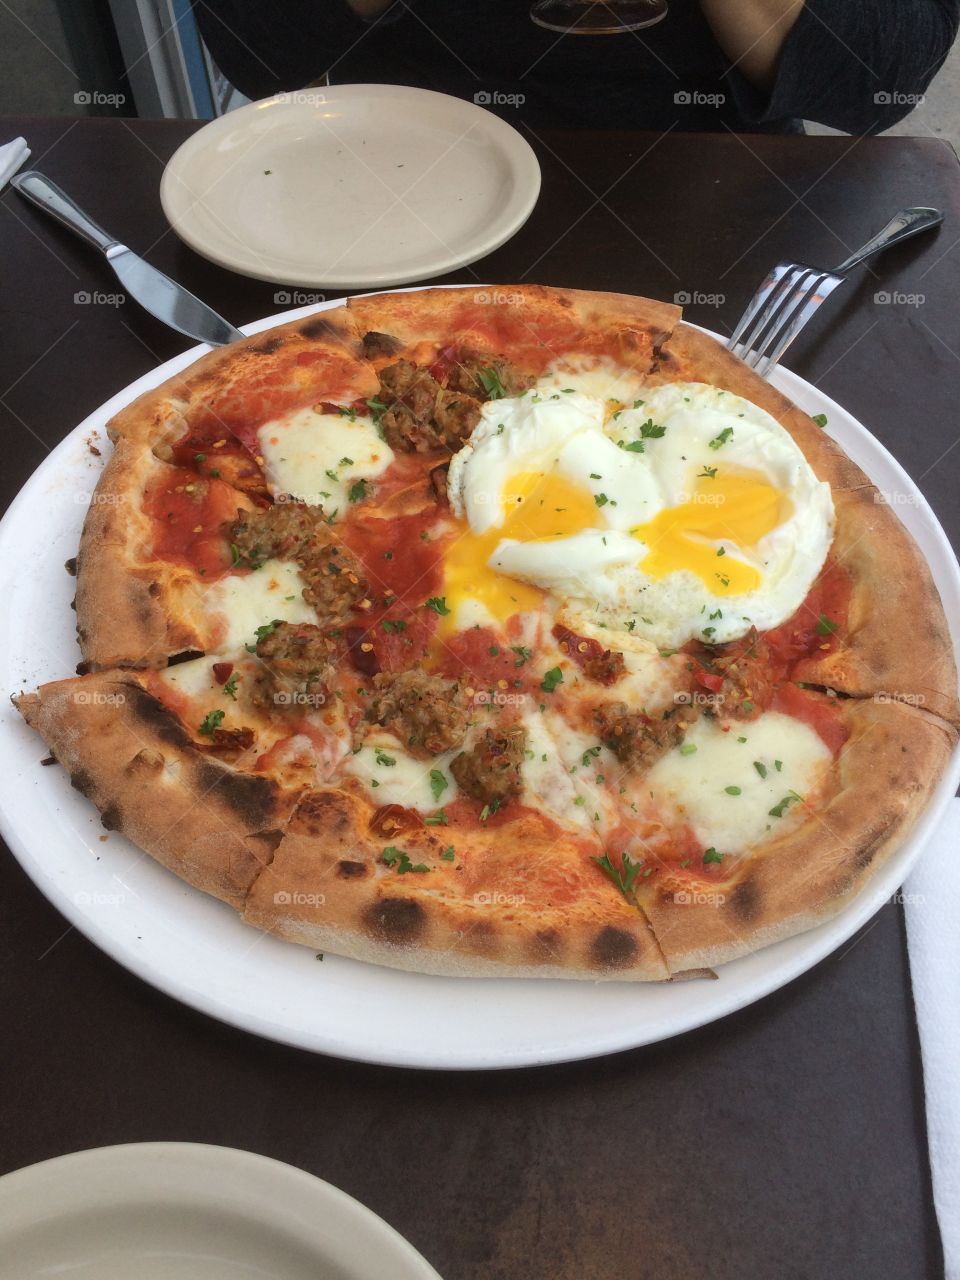 Egg on my pizza